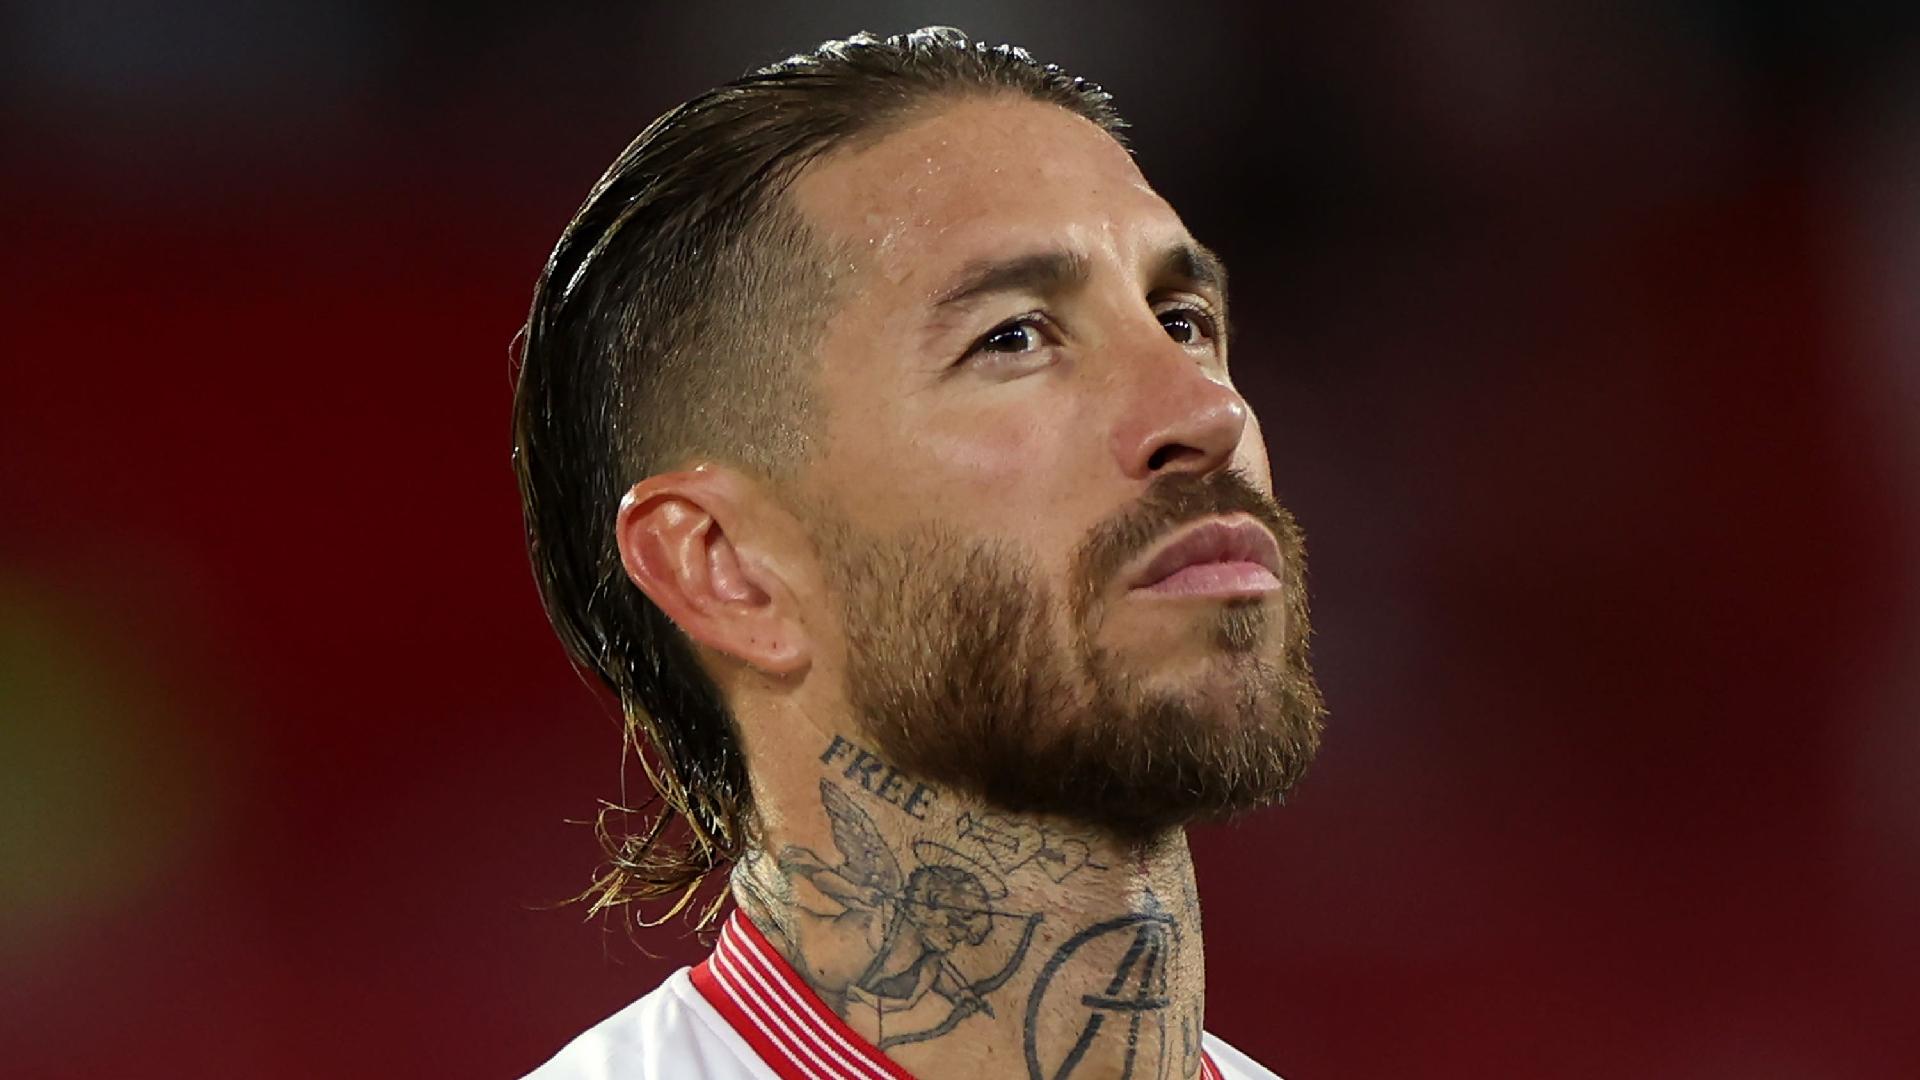 Sergio Ramos stops post-match interview to 'attack' fan